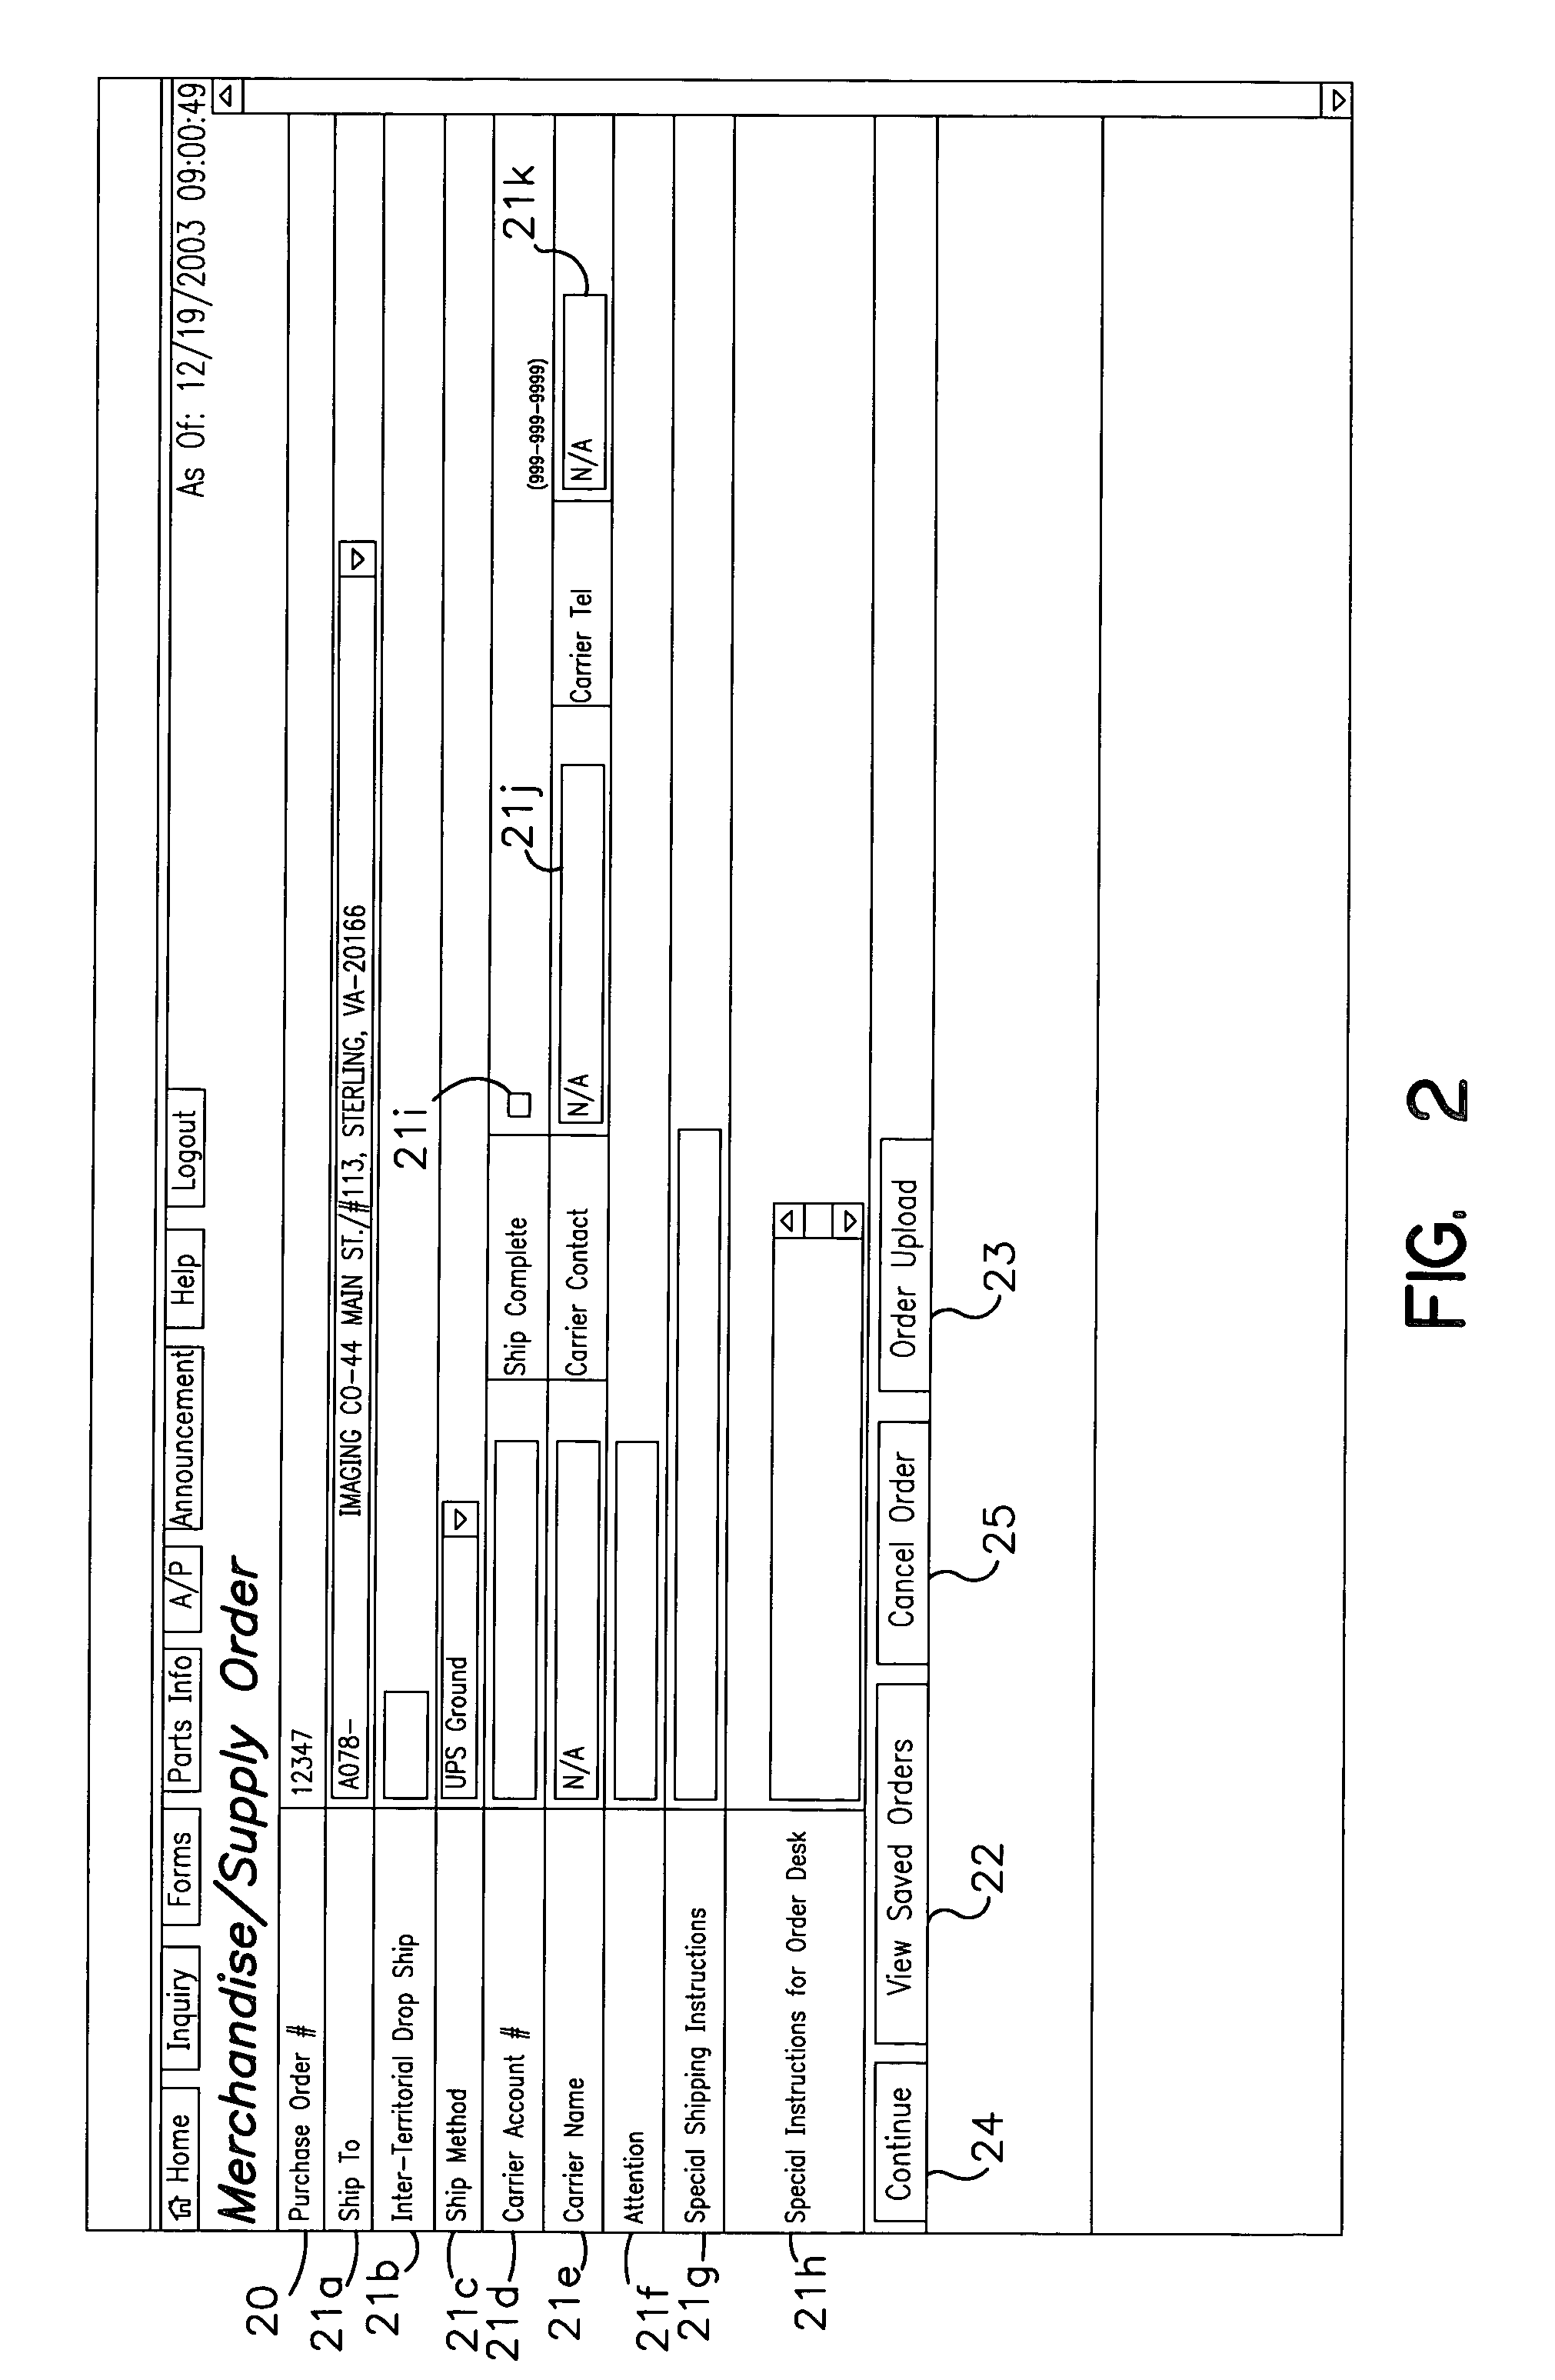 Estimated time of arrival (ETA) systems and methods